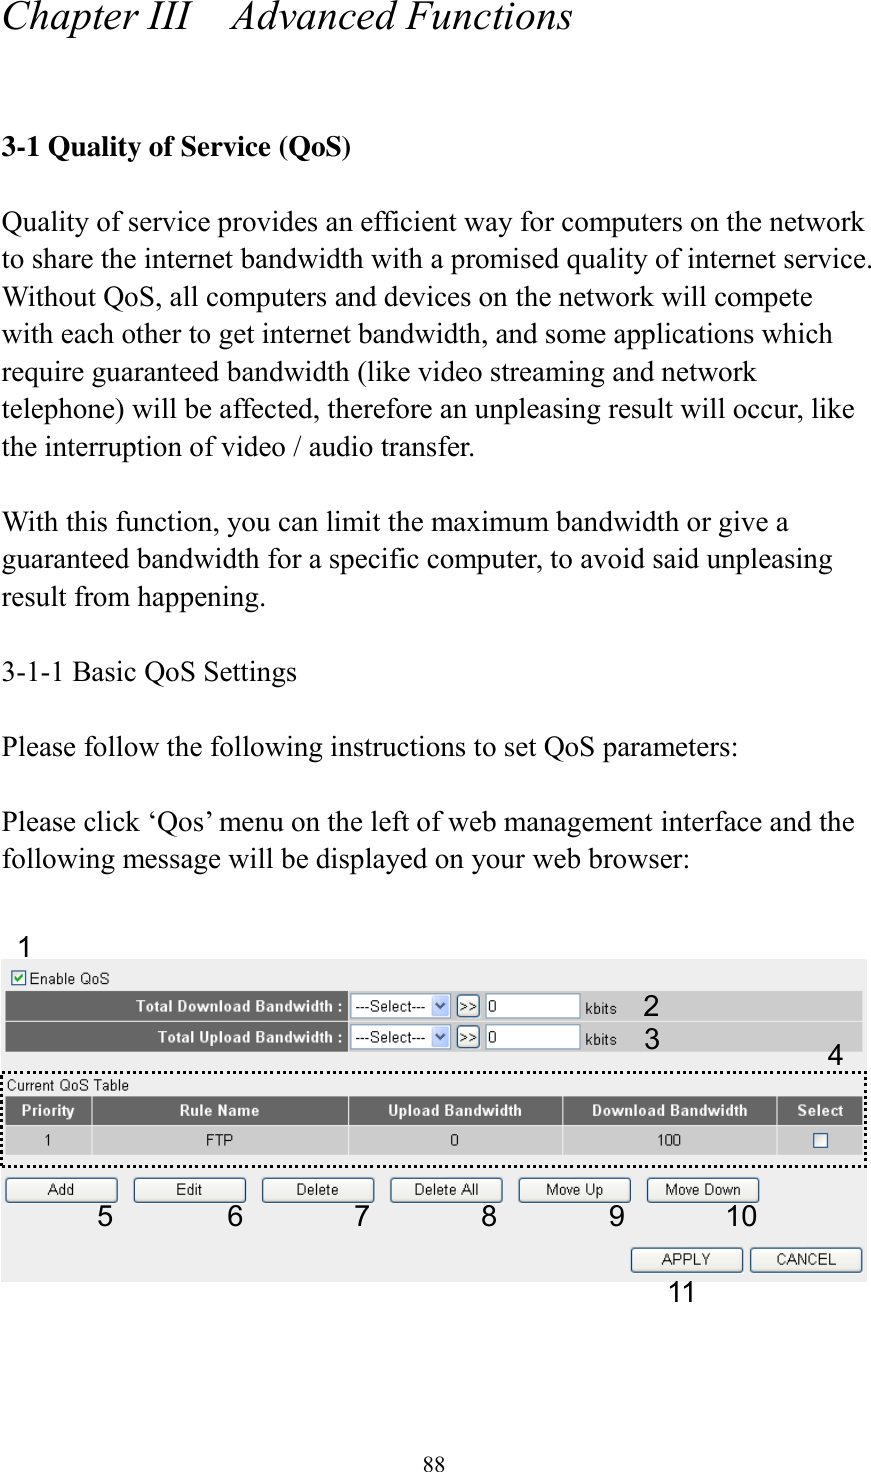 88 Chapter III    Advanced Functions  3-1 Quality of Service (QoS)  Quality of service provides an efficient way for computers on the network to share the internet bandwidth with a promised quality of internet service. Without QoS, all computers and devices on the network will compete with each other to get internet bandwidth, and some applications which require guaranteed bandwidth (like video streaming and network telephone) will be affected, therefore an unpleasing result will occur, like the interruption of video / audio transfer.    With this function, you can limit the maximum bandwidth or give a guaranteed bandwidth for a specific computer, to avoid said unpleasing result from happening.  3-1-1 Basic QoS Settings  Please follow the following instructions to set QoS parameters:  Please click ‘Qos’ menu on the left of web management interface and the following message will be displayed on your web browser:       1 2 3 4 5 6 7 8 9 10 11 